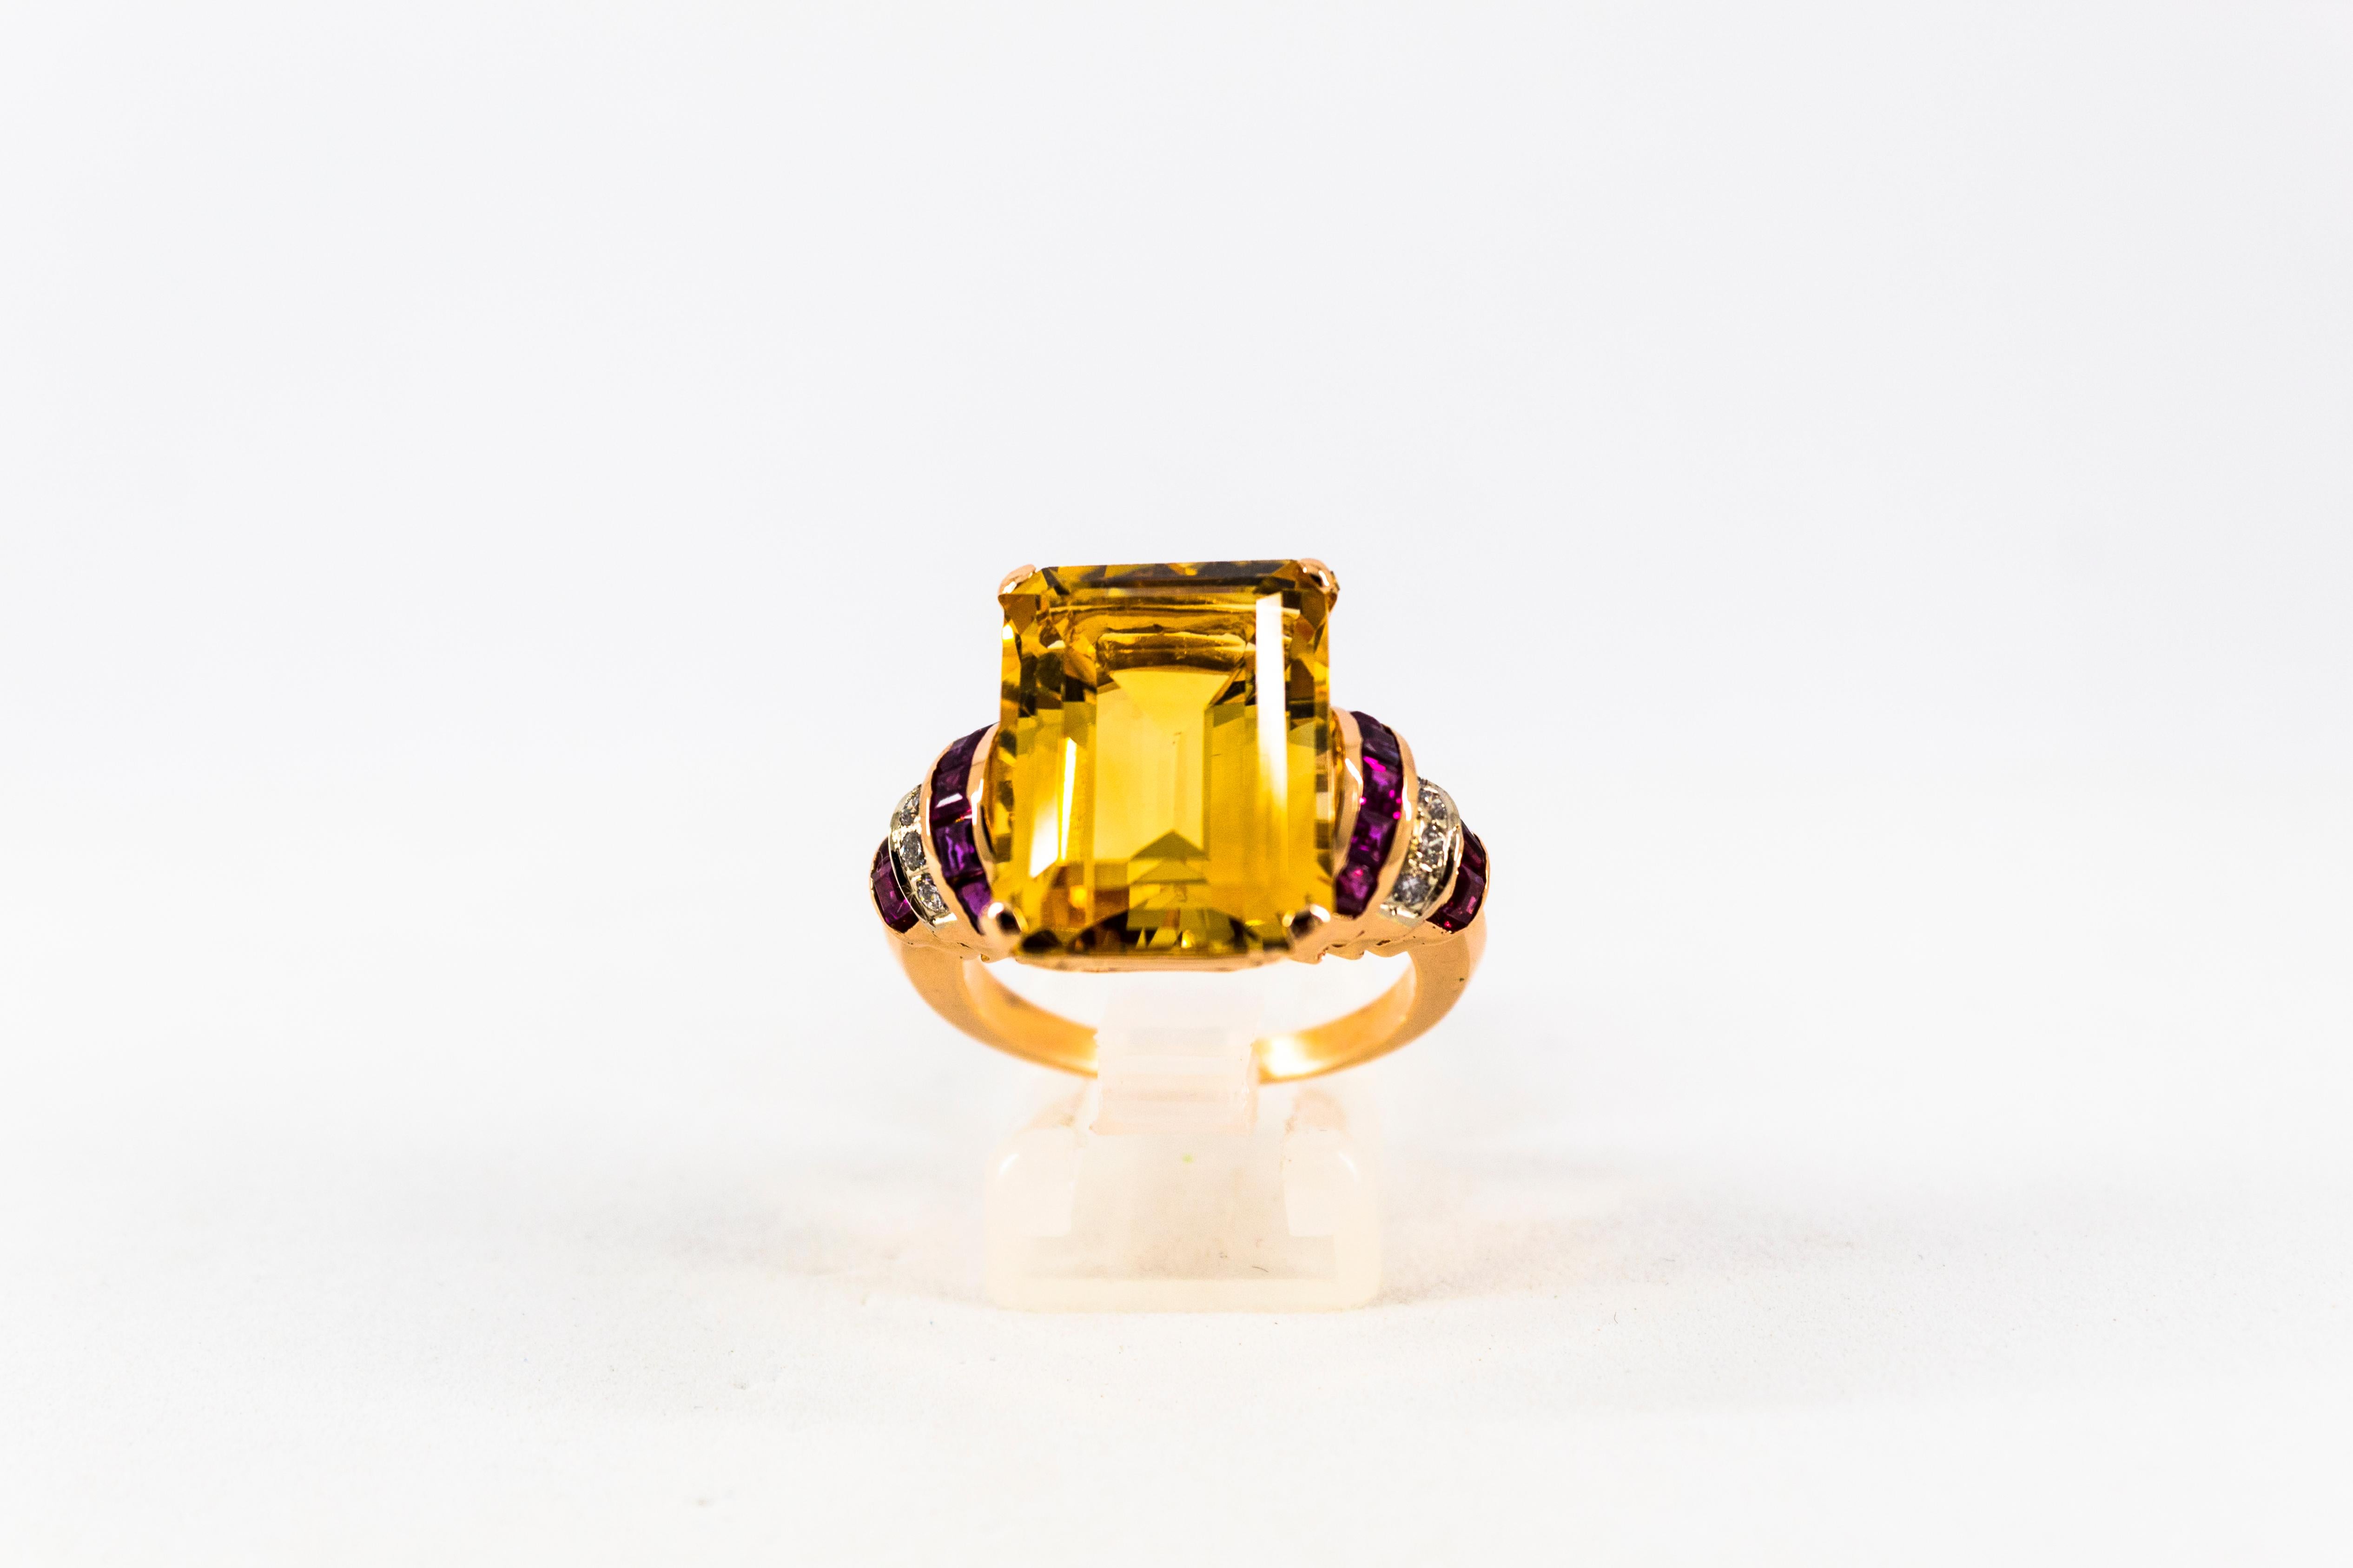 This Ring is made of 14K Yellow Gold.
This Ring has 0.12 Carats of White Brilliant Cut Diamonds.
This Ring has 0.30 Carats of Rubies.
This Ring has also a 12.00 Carats Citrine.
This Ring is inspired by Art Deco.

Size ITA: 15 USA: 7 and 1/4

We're a